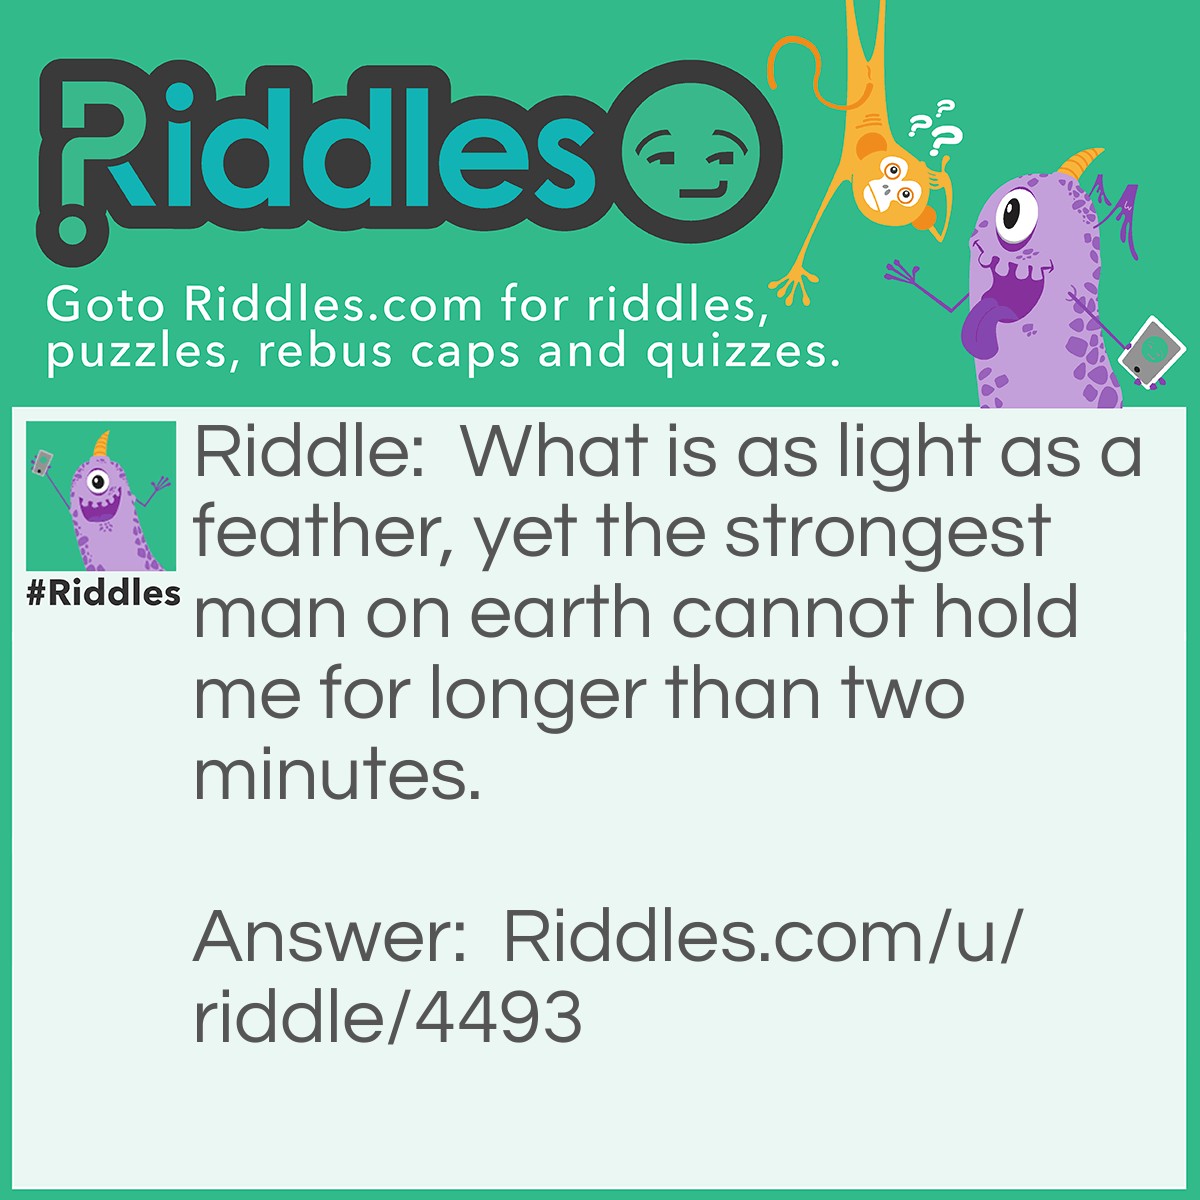 Riddle: What is as light as a feather, yet the strongest man on earth cannot hold me for longer than two minutes. Answer: Your breath.